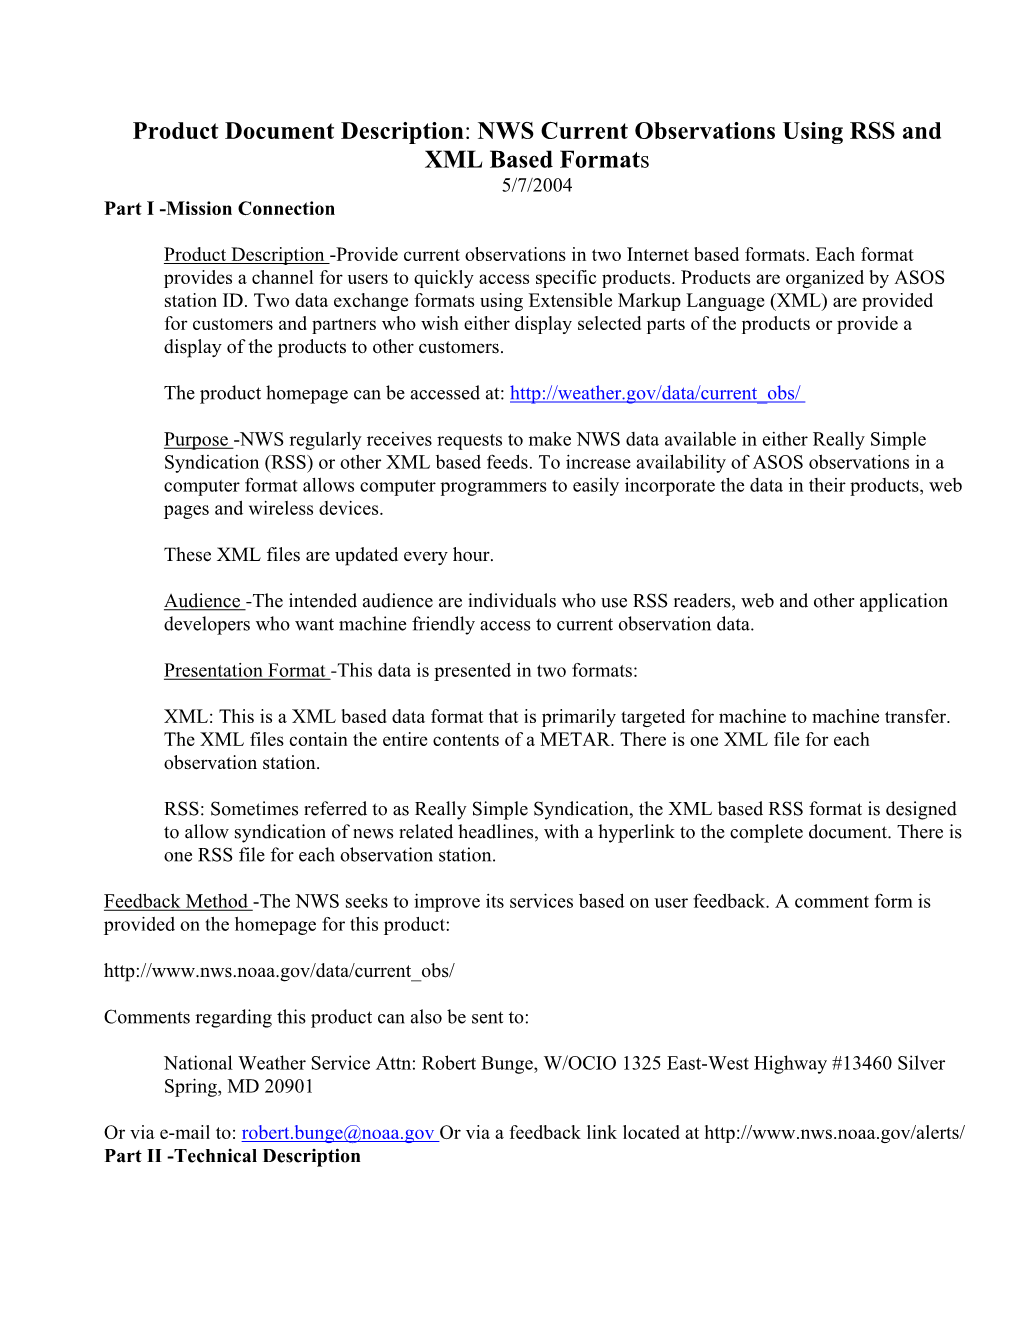 NWS Current Observations Using RSS and XML Based Formats 5/7/2004 Part I -Mission Connection